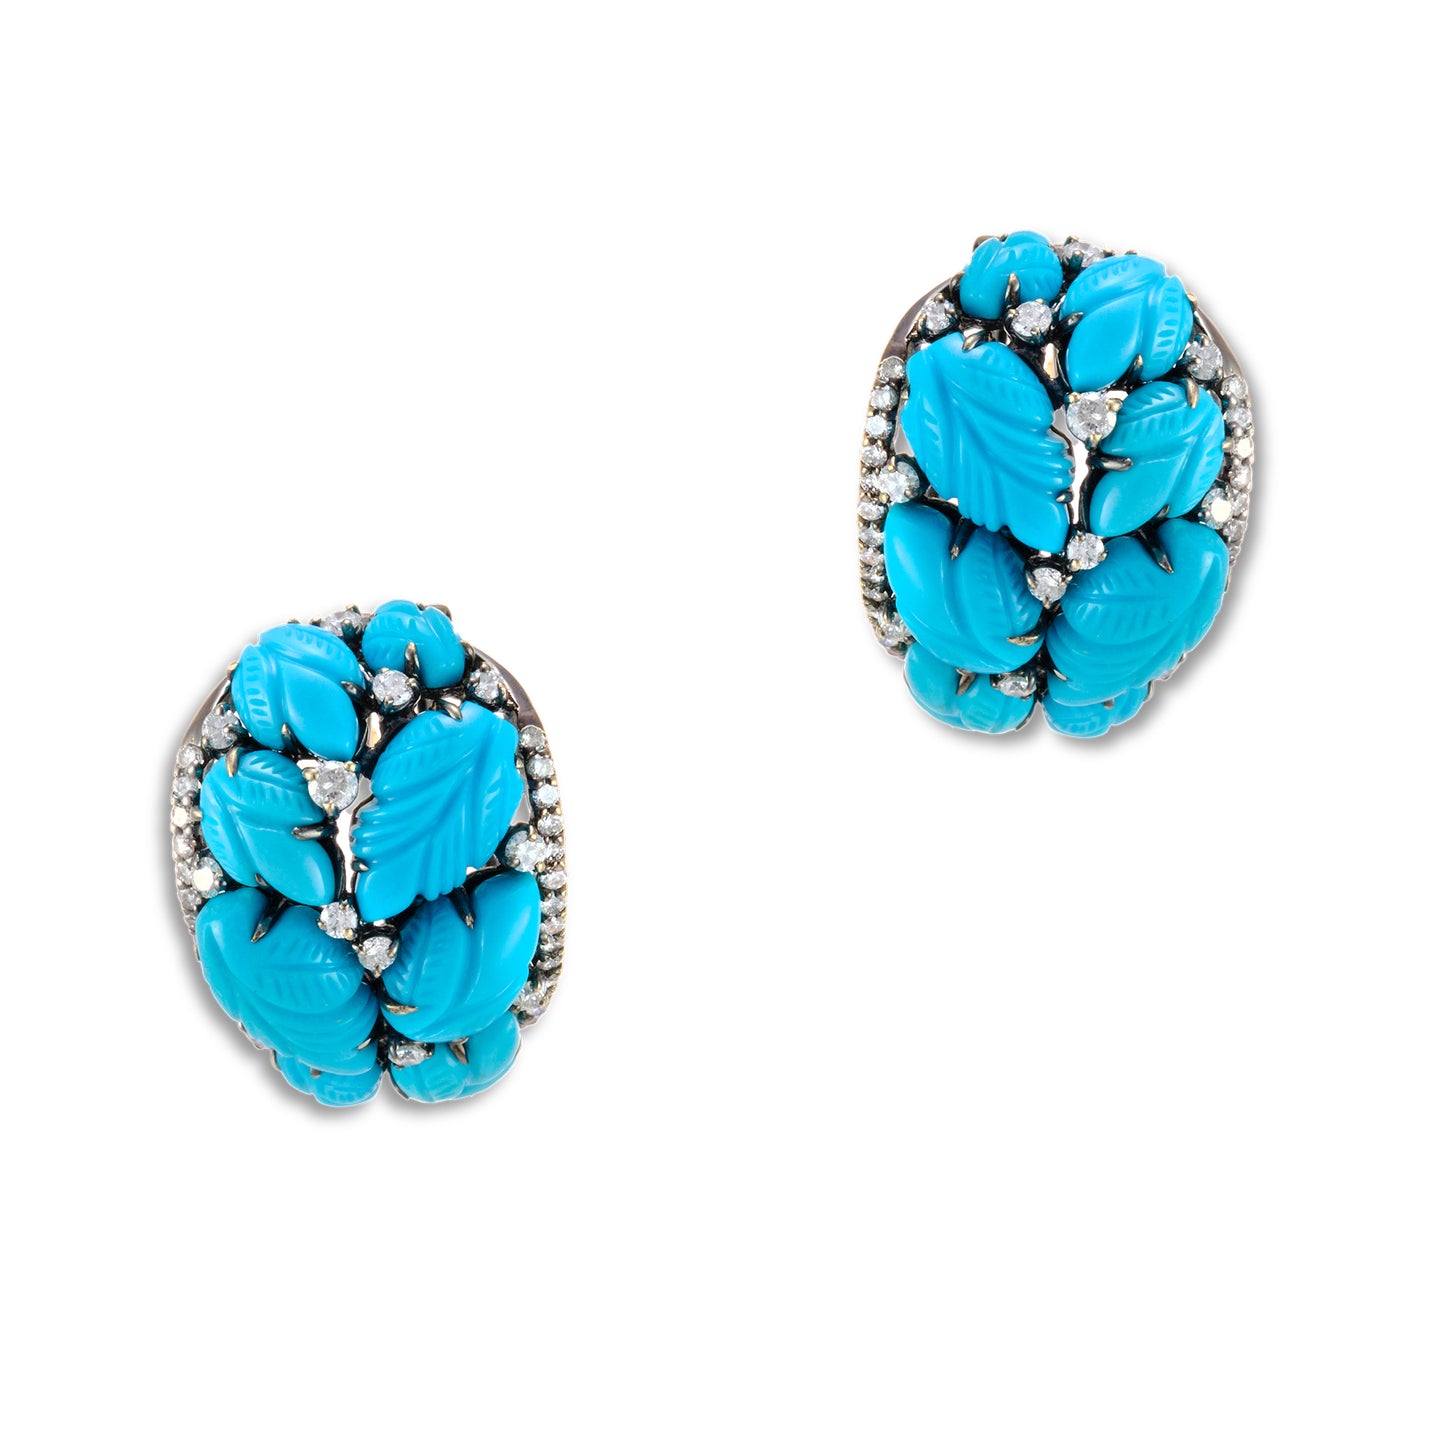 Vintage Carved Turquoise Earrings